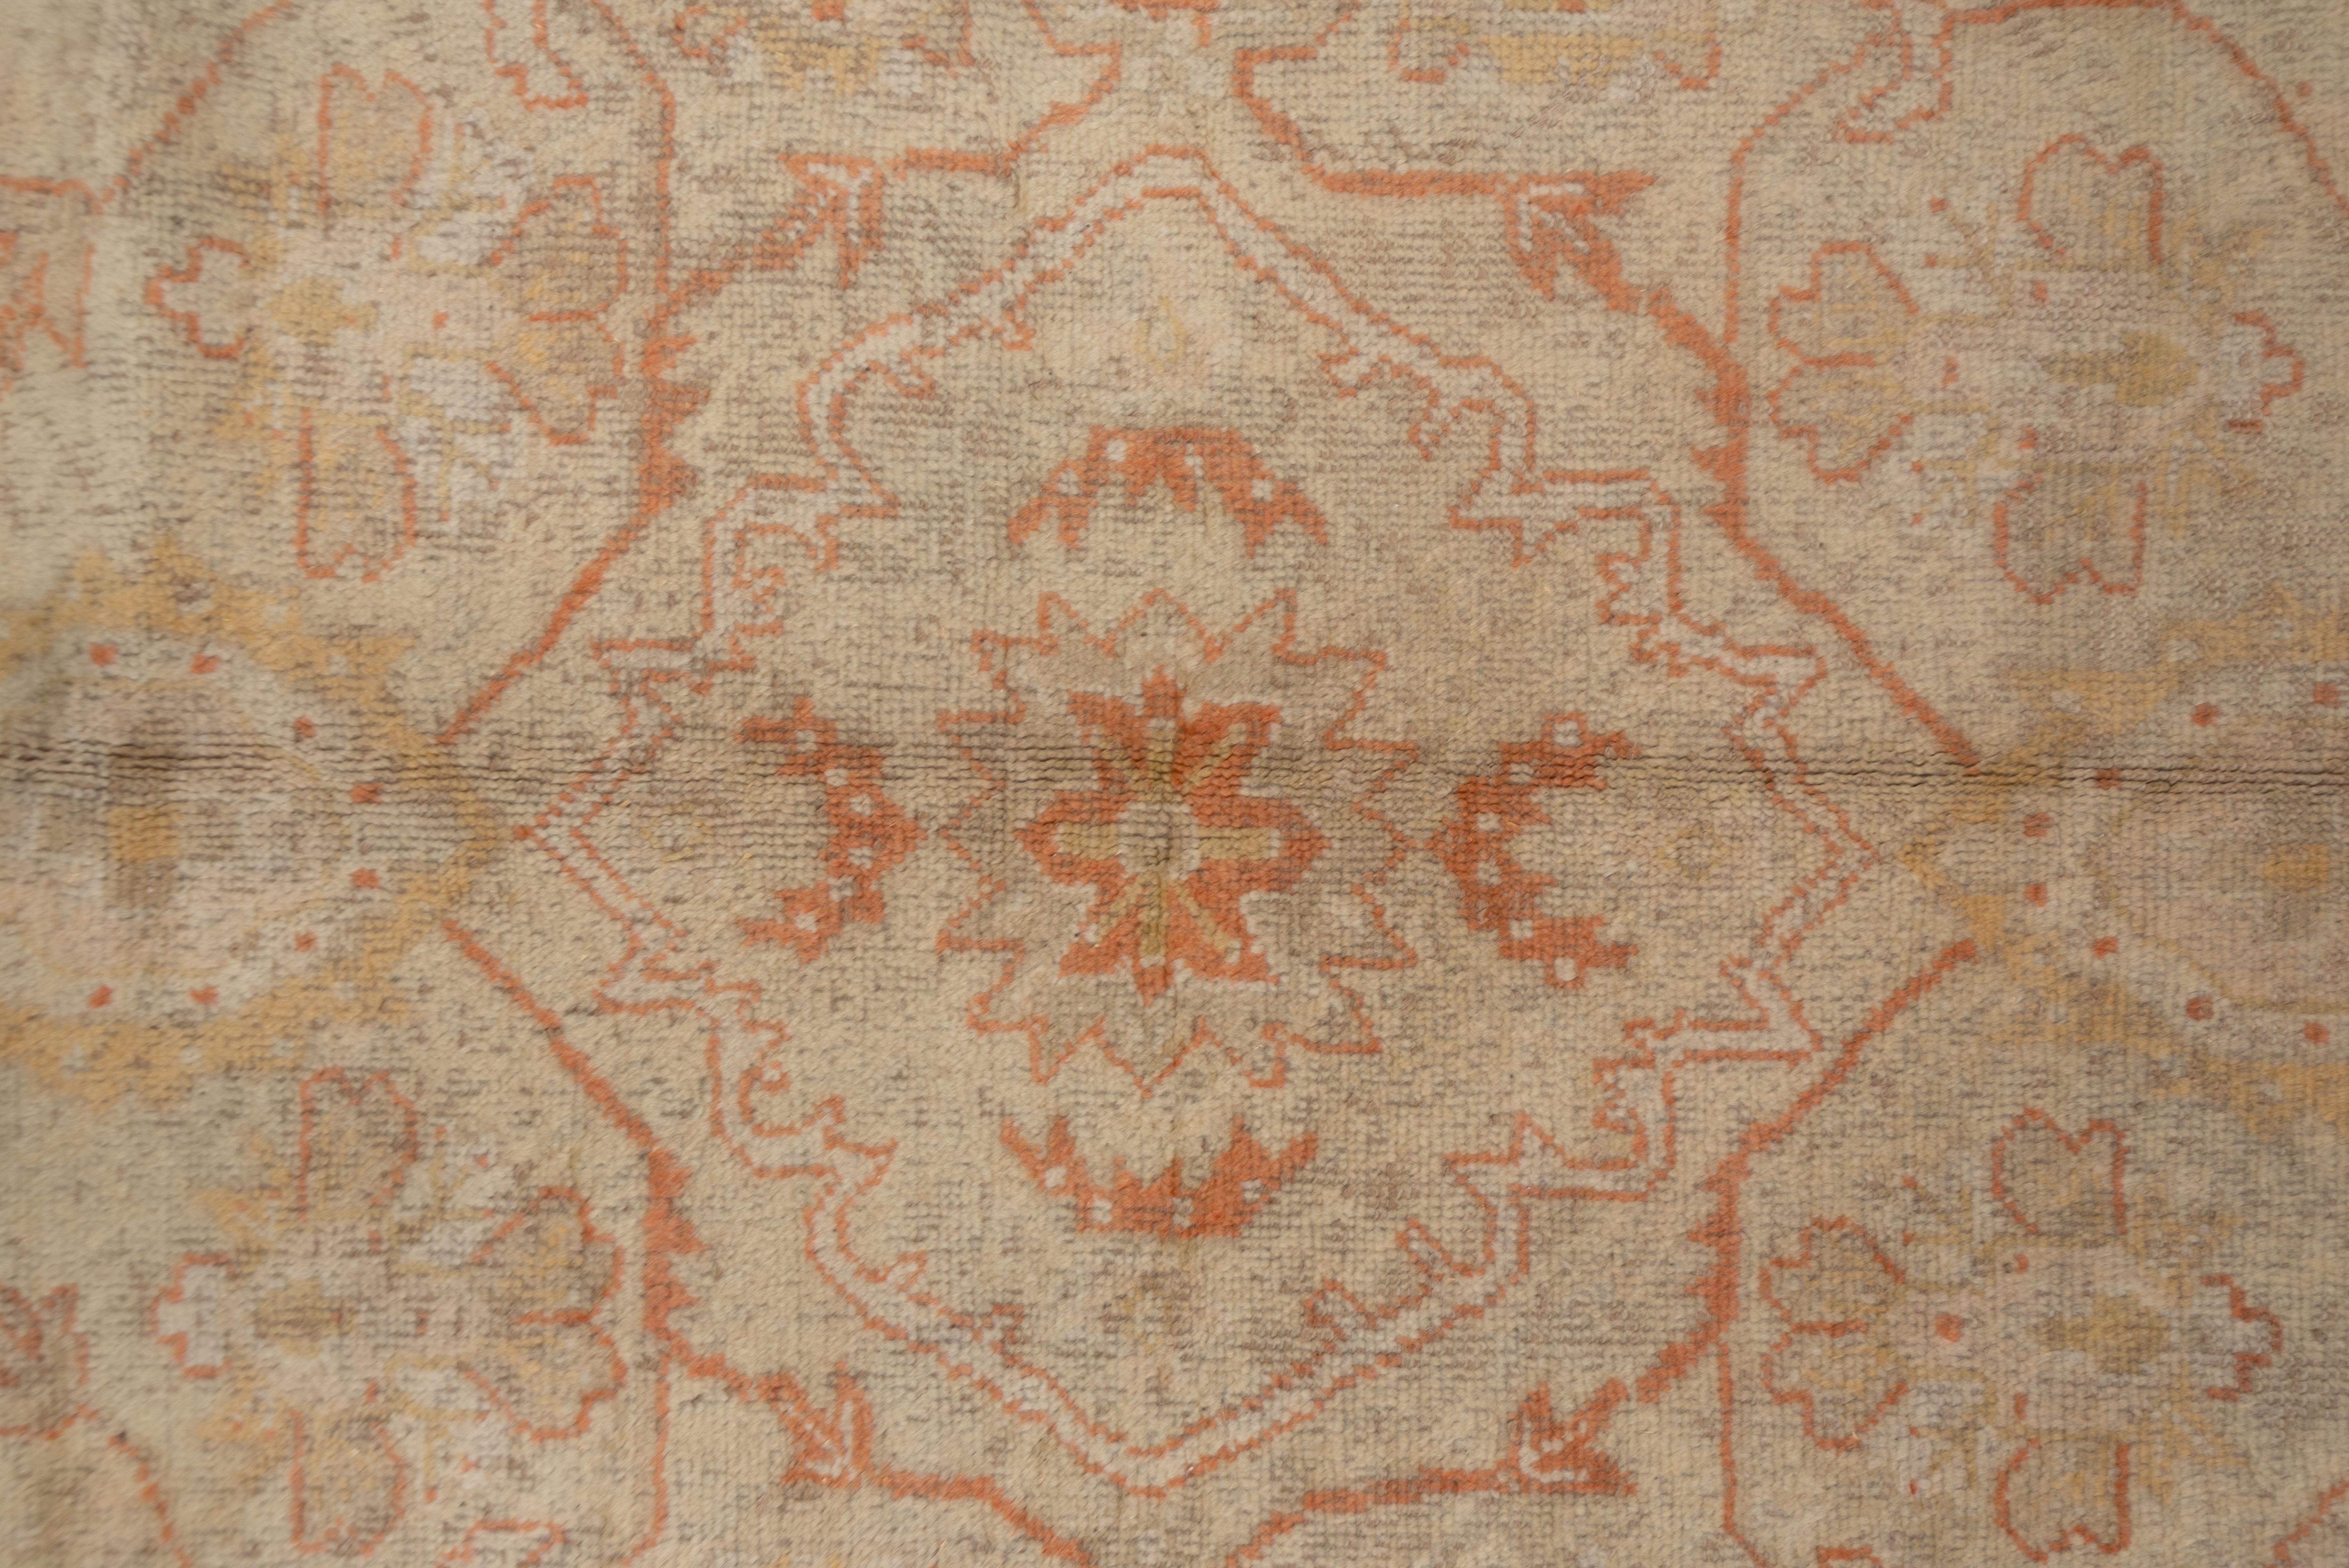 Antique Turkish Oushak Rug, Neutral Field, Orange Borders & Accents, circa 1910s In Good Condition For Sale In New York, NY